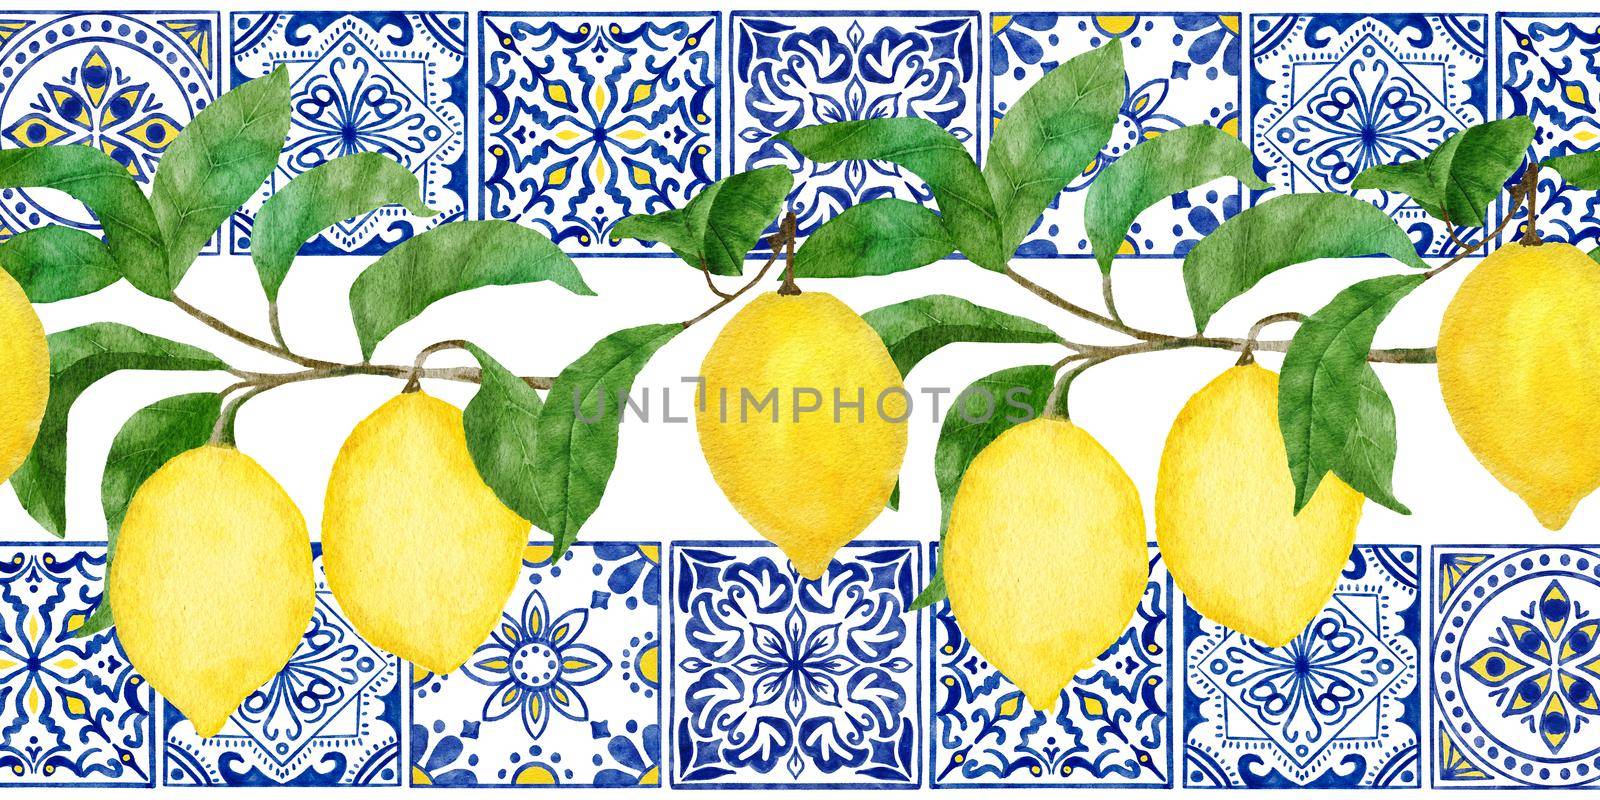 Hand drawn watercolor seamless border with yellow citrus lemons, blue white portugese azulejo tiles. Bright summer holiday vintage frame, tasty fruit healthy juicy ripe. by Lagmar